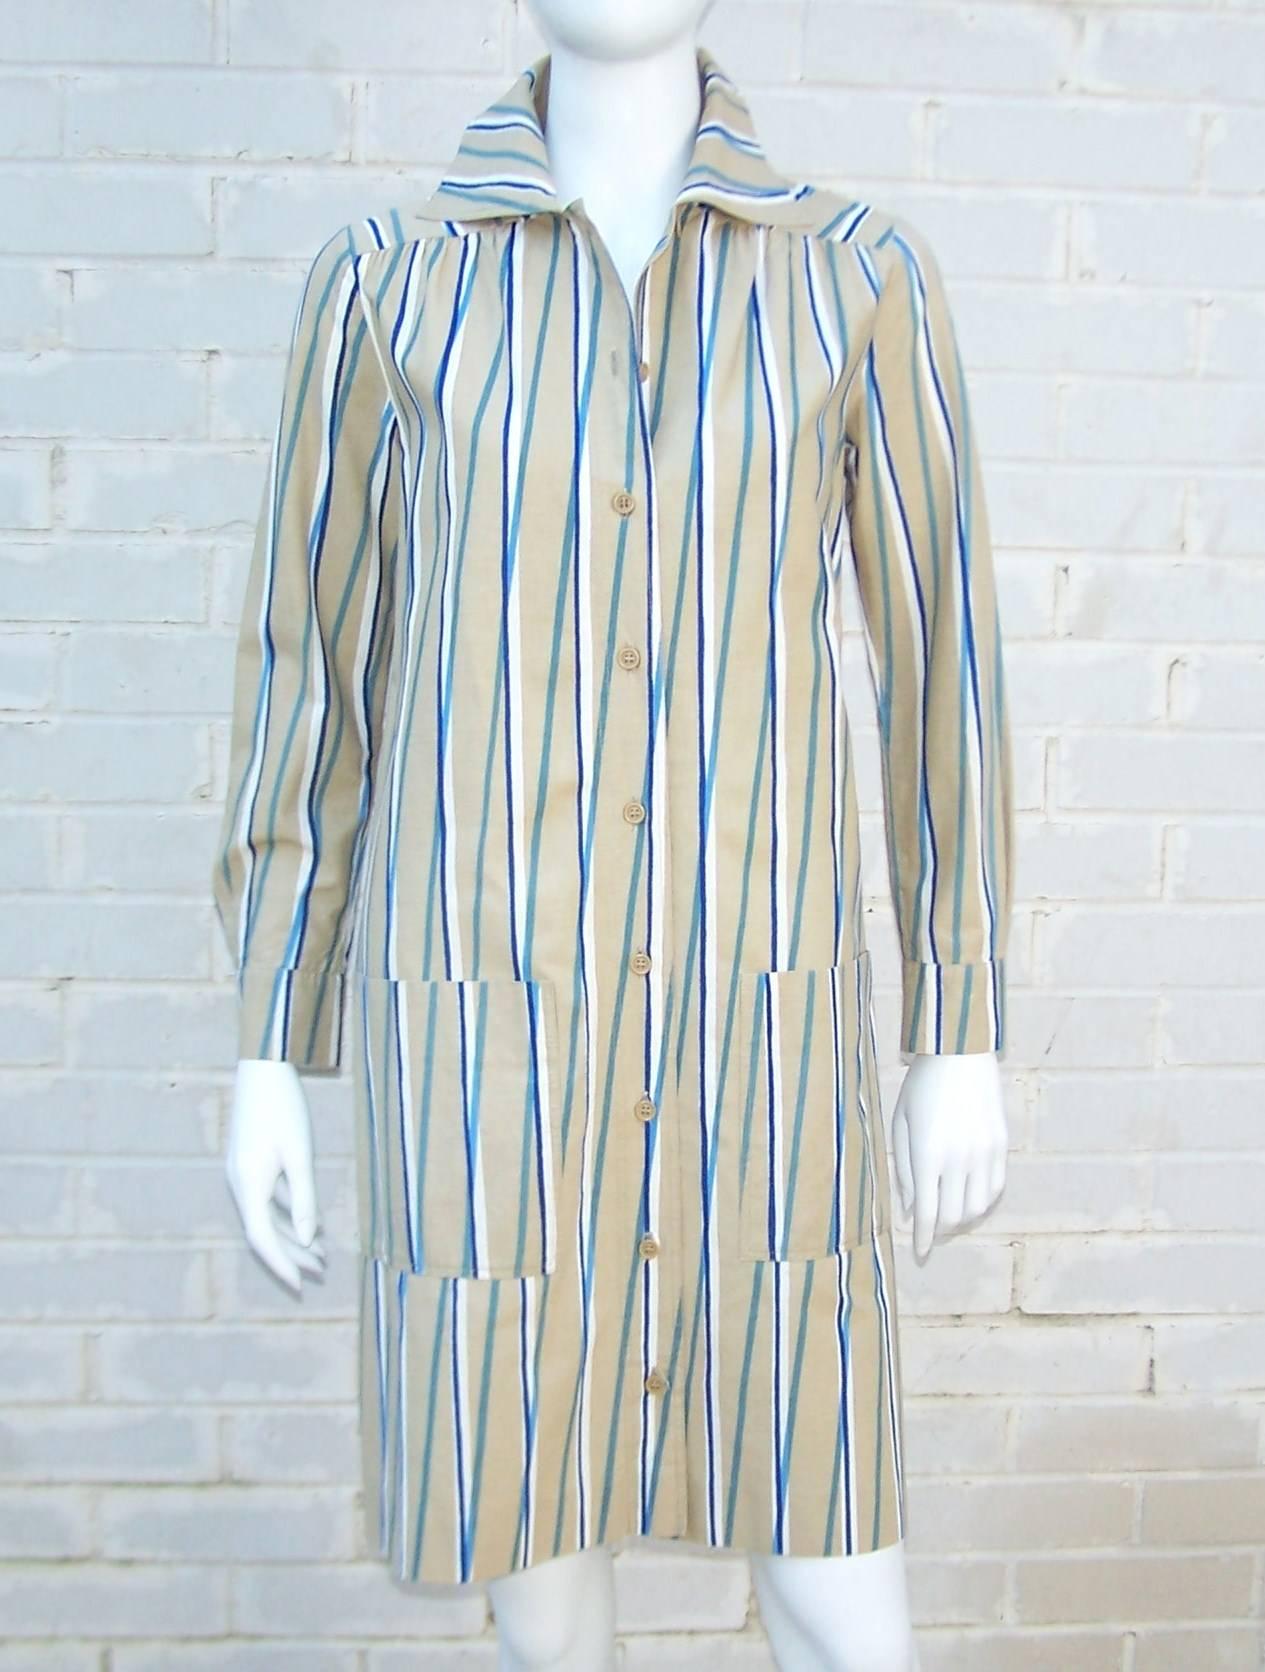 Crisp cotton fabric and a bold op art design are the hallmarks of this 1974 Marimekko shirt dress.  It buttons up the front with large front pocket and bears a resemblance to an artist's smock.  Consider wearing it as a tunic or jacket over